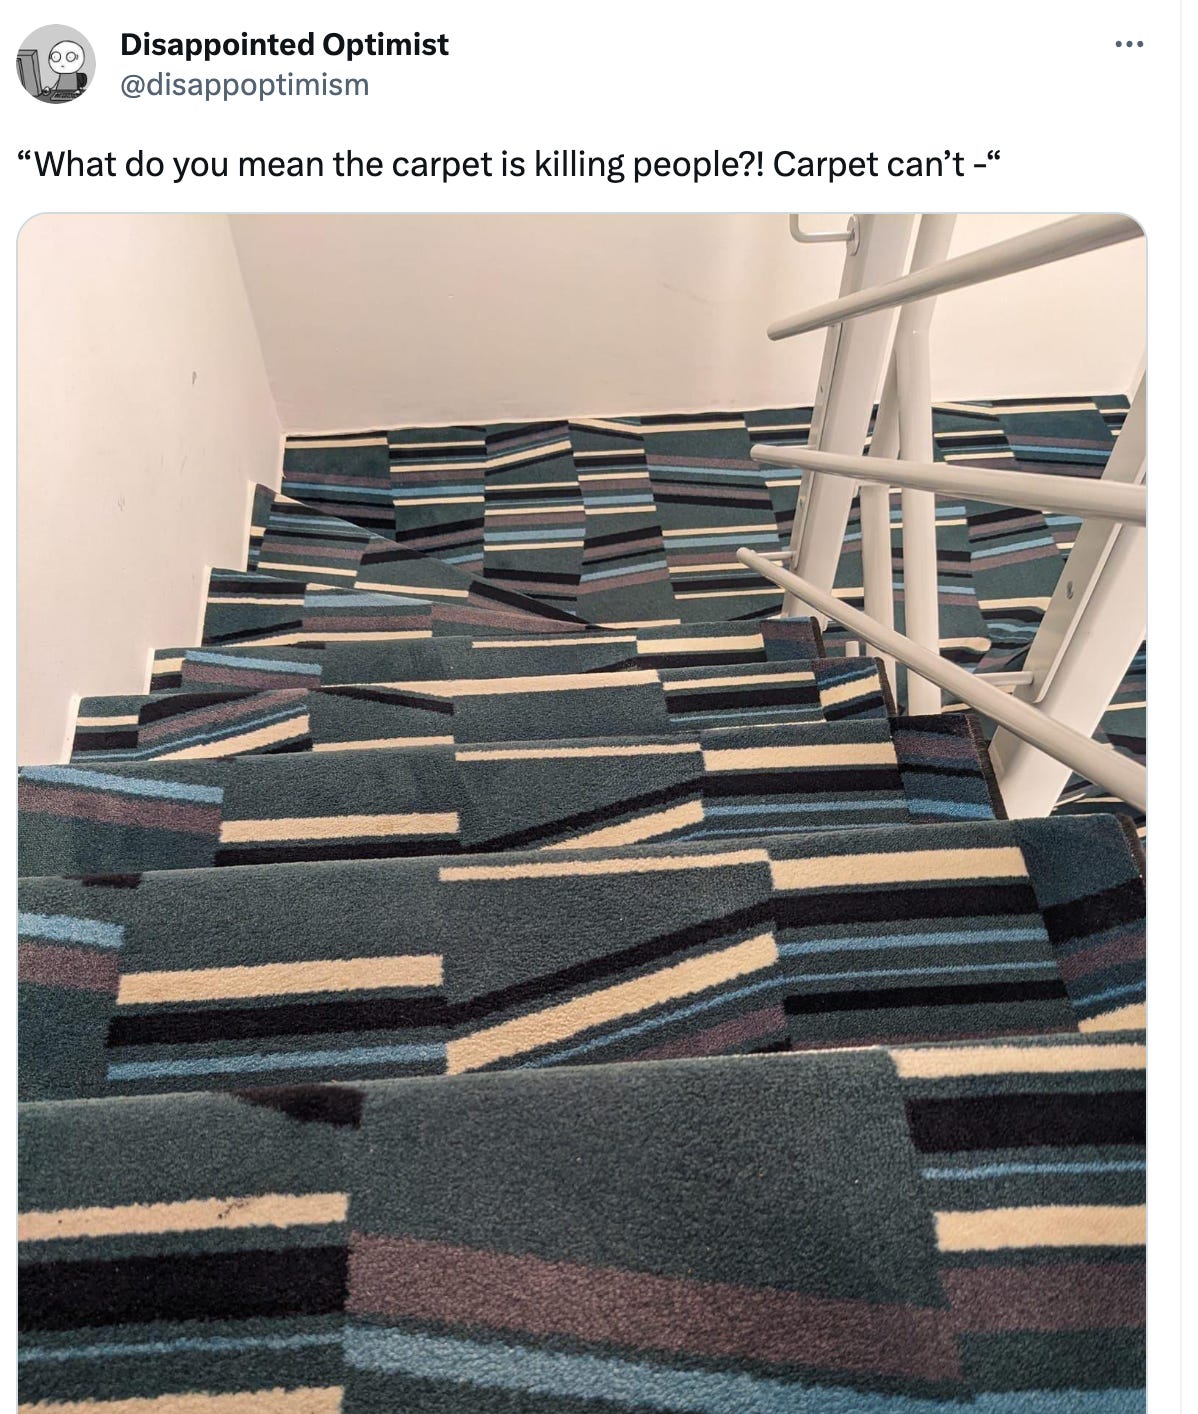  See new Tweets Conversation Disappointed Optimist @disappoptimism “What do you mean the carpet is killing people?! Carpet can’t -“